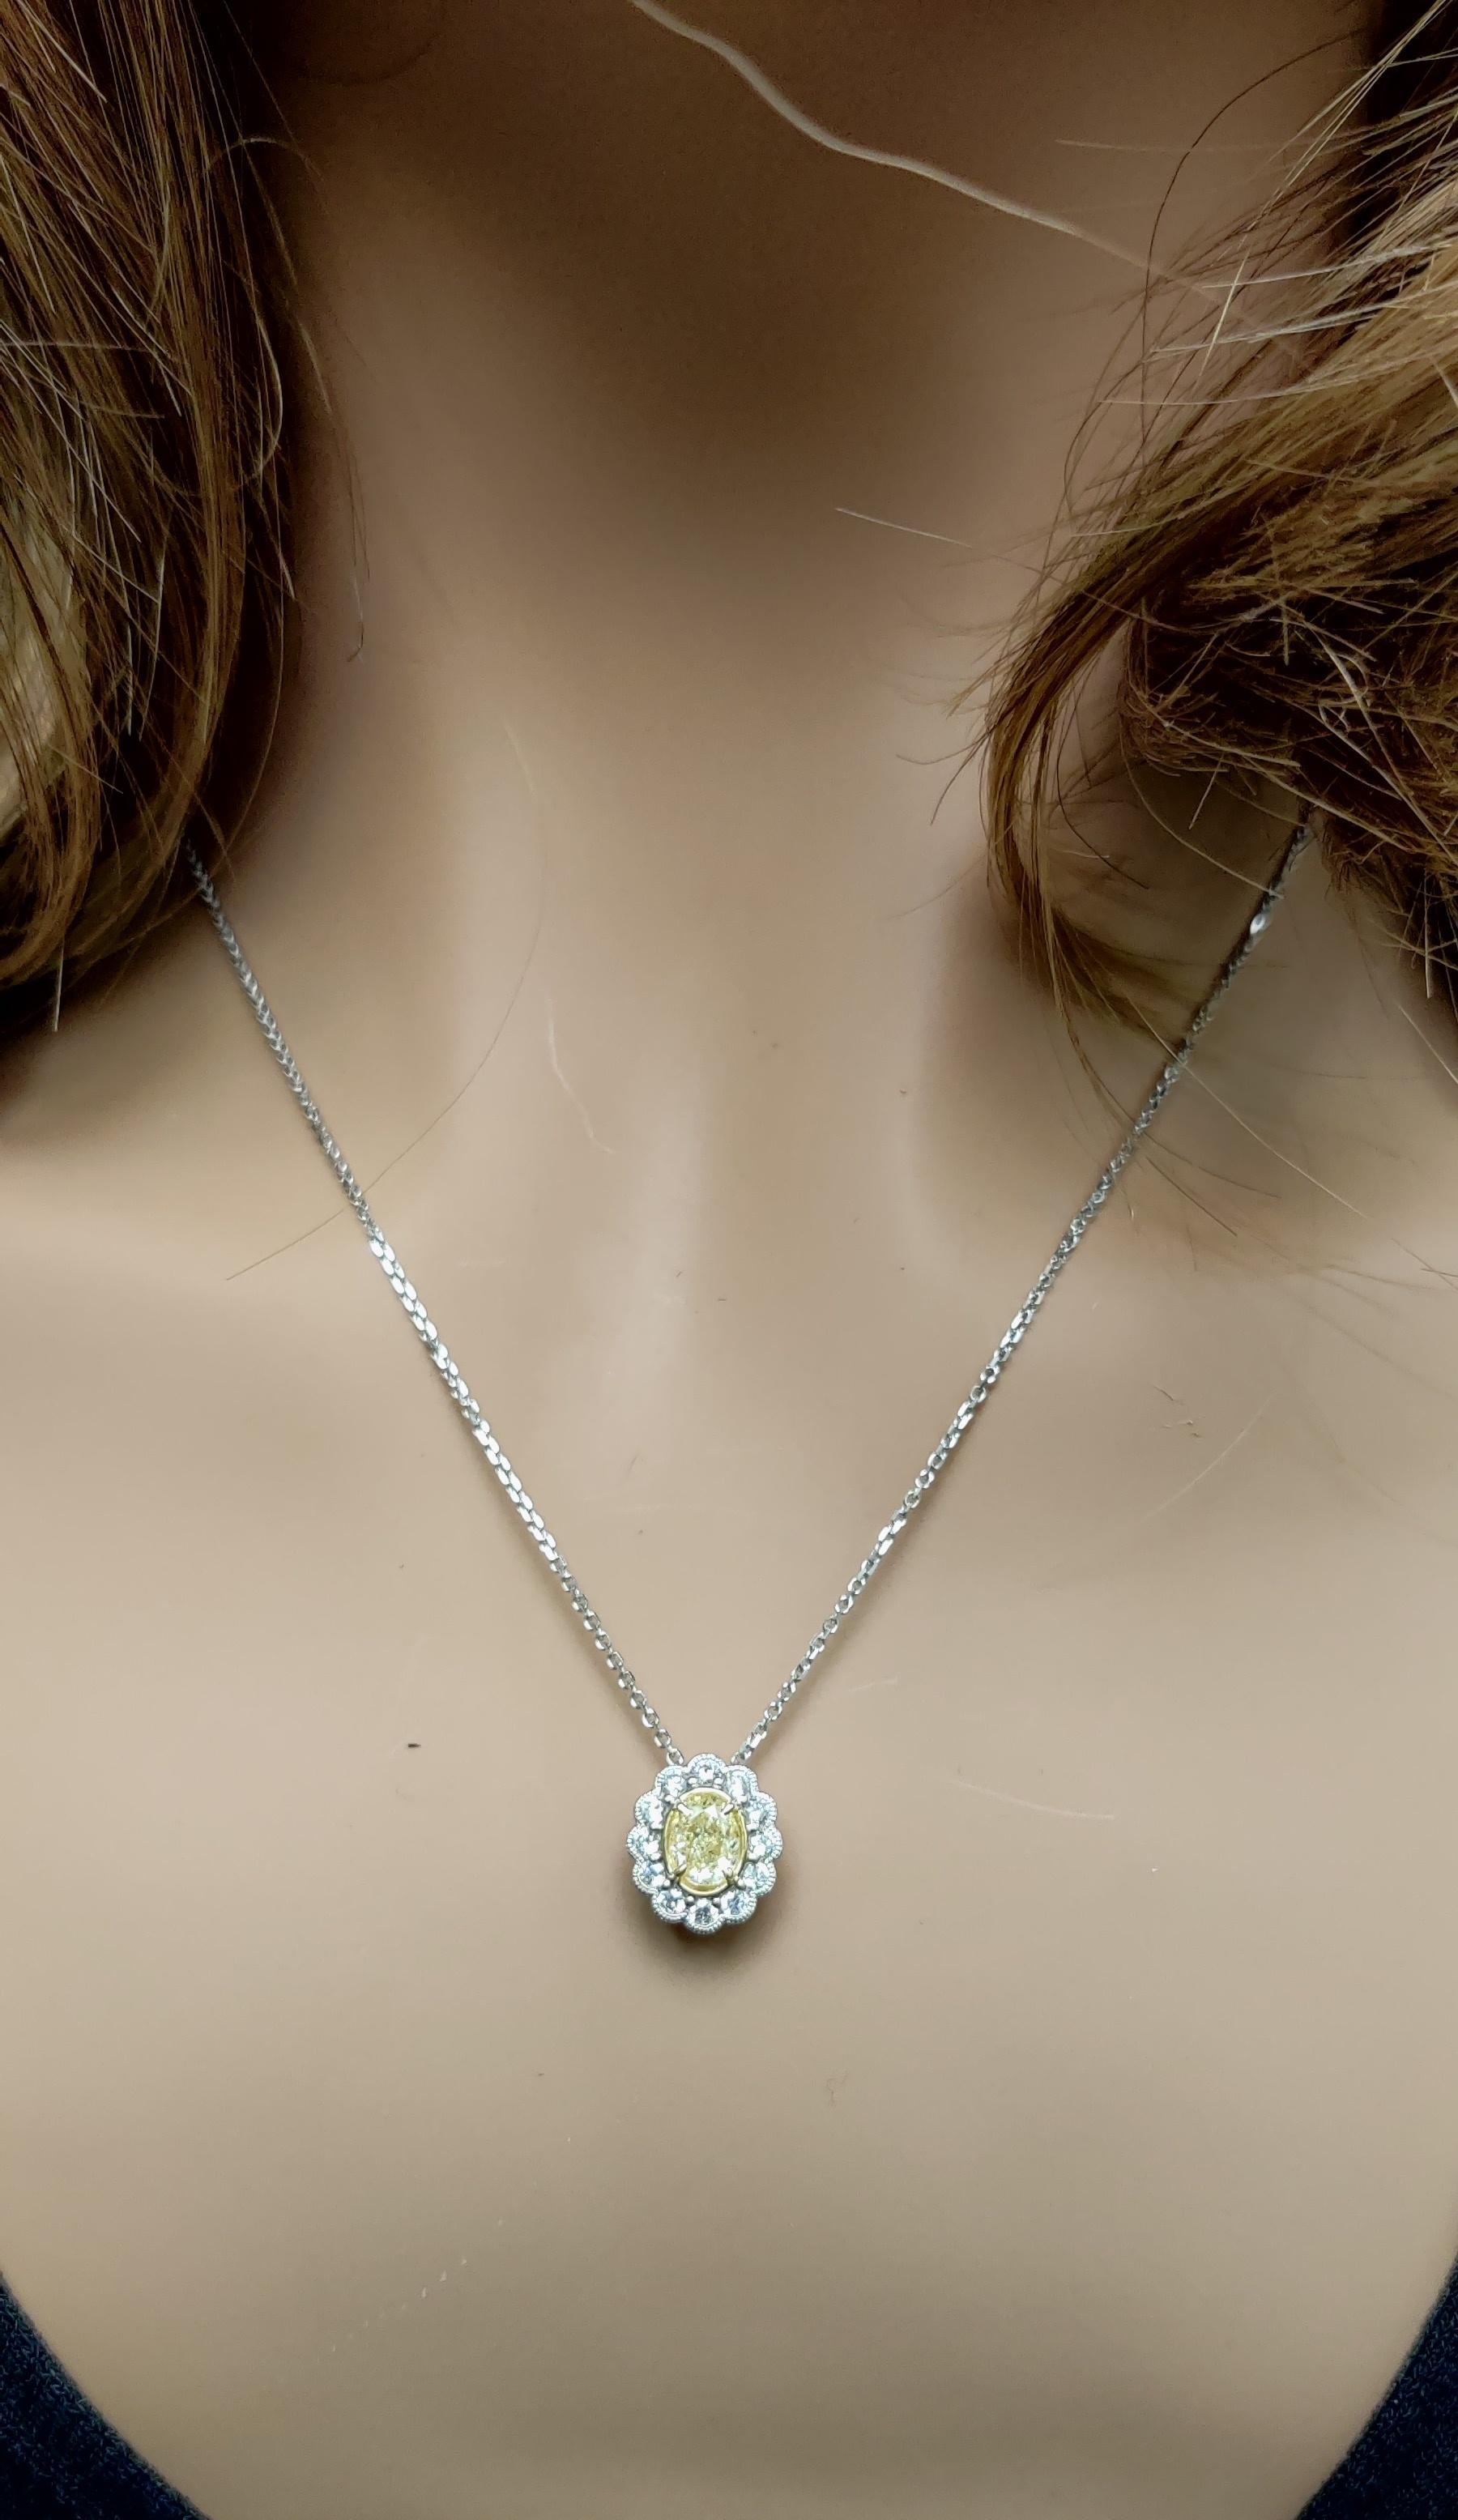 RareGemWorld's classic diamond pendant. Mounted in a beautiful 18K Yellow and White Gold setting with a natural oval cut yellow diamond. The yellow diamond is surrounded by natural round white diamond melee. This pendant is guaranteed to impress and